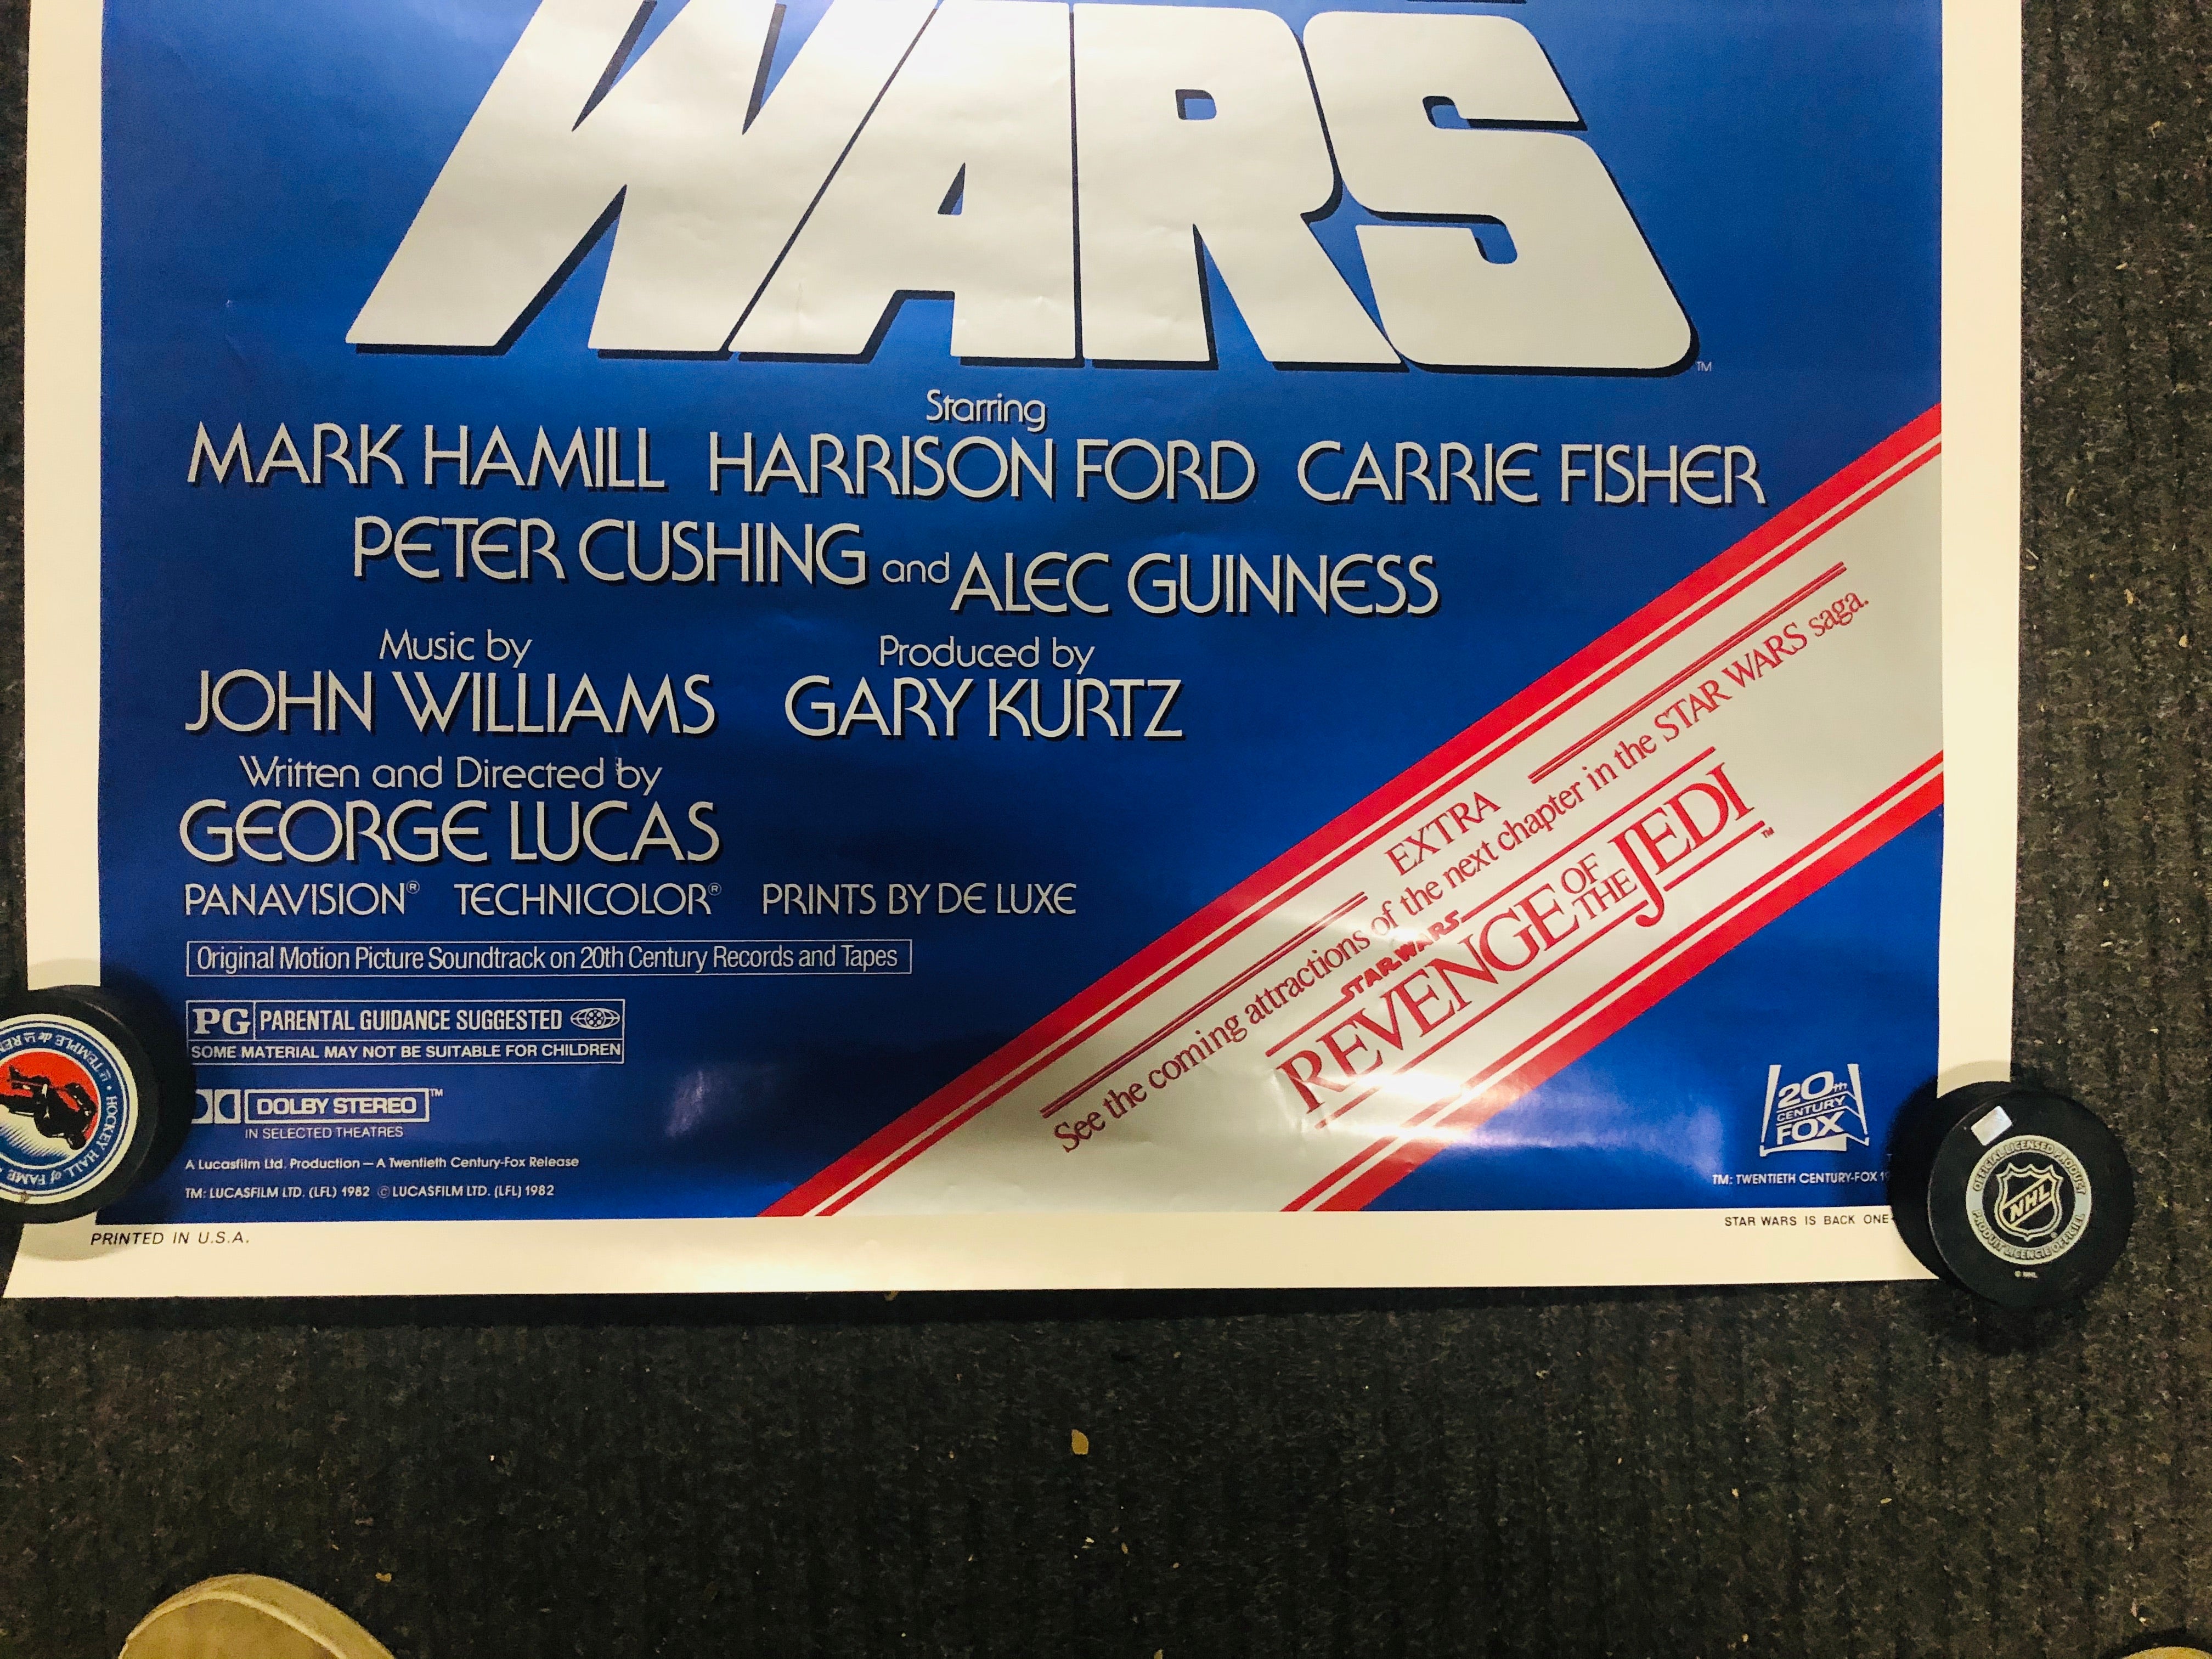 Star Wars movie rerelease original poster with Revenge of the Jedi rare preview